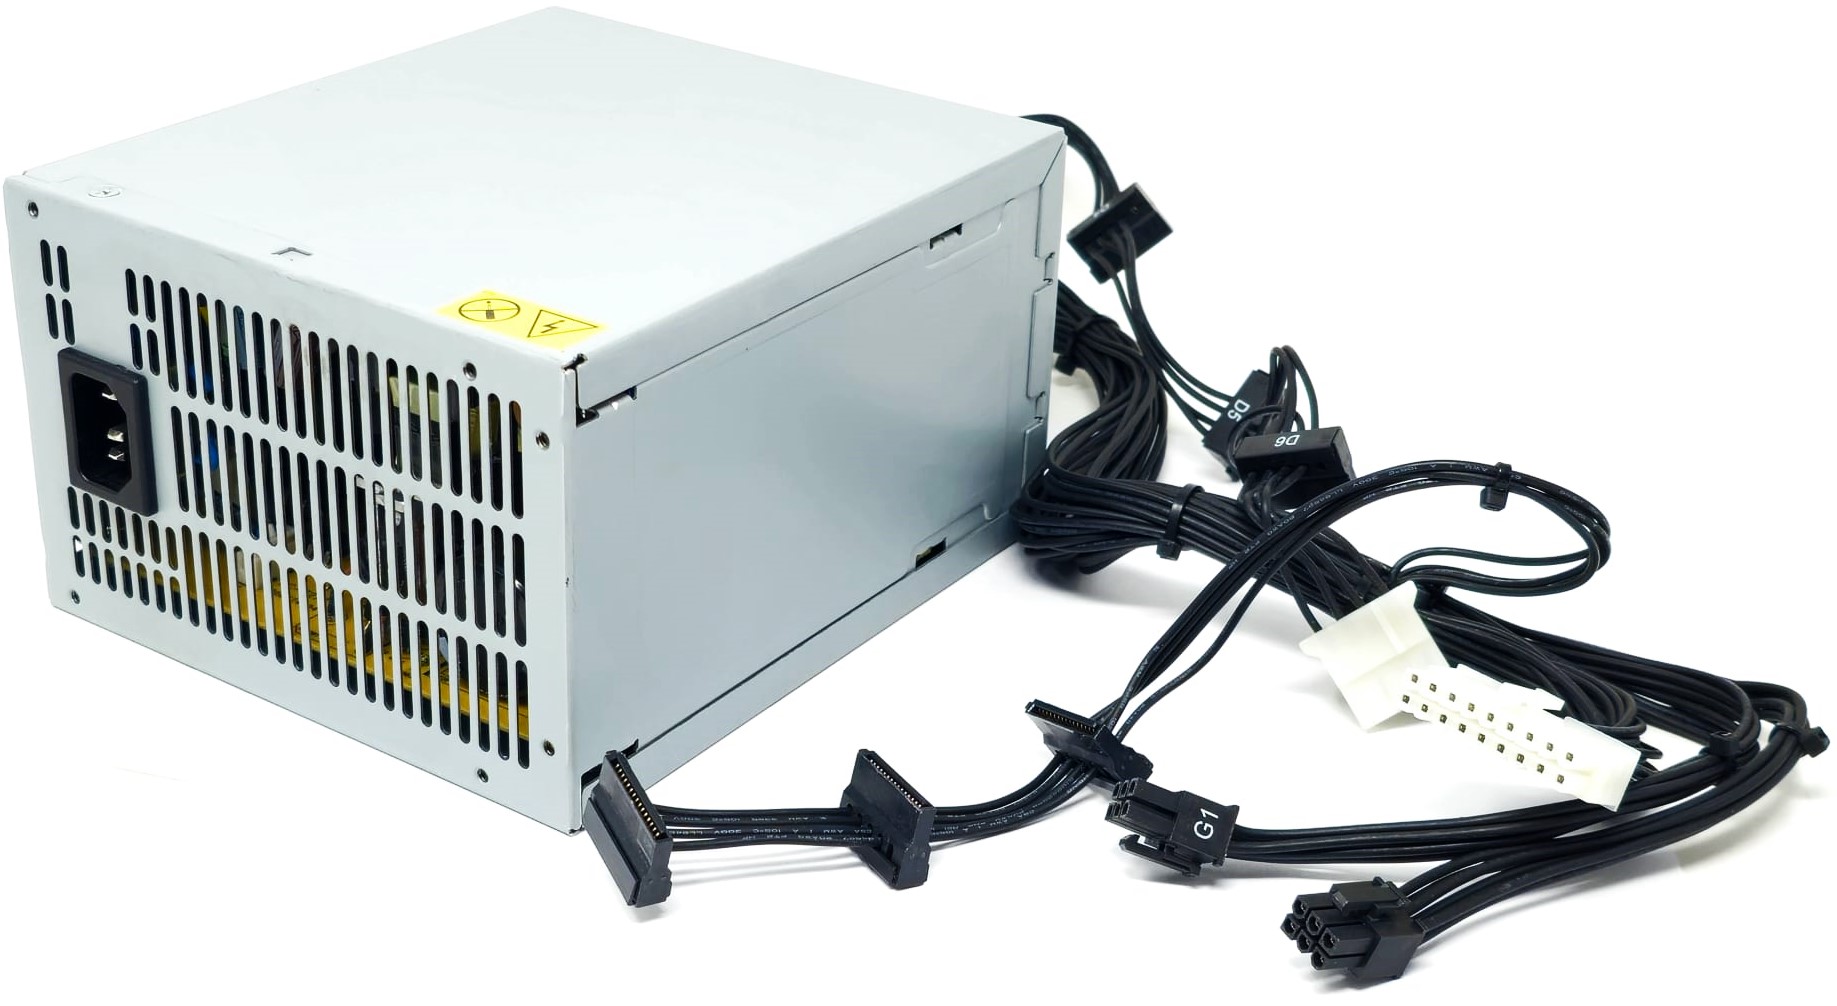 HP DPS-600UB A - 600W Power Supply for HP Z420 Workstation